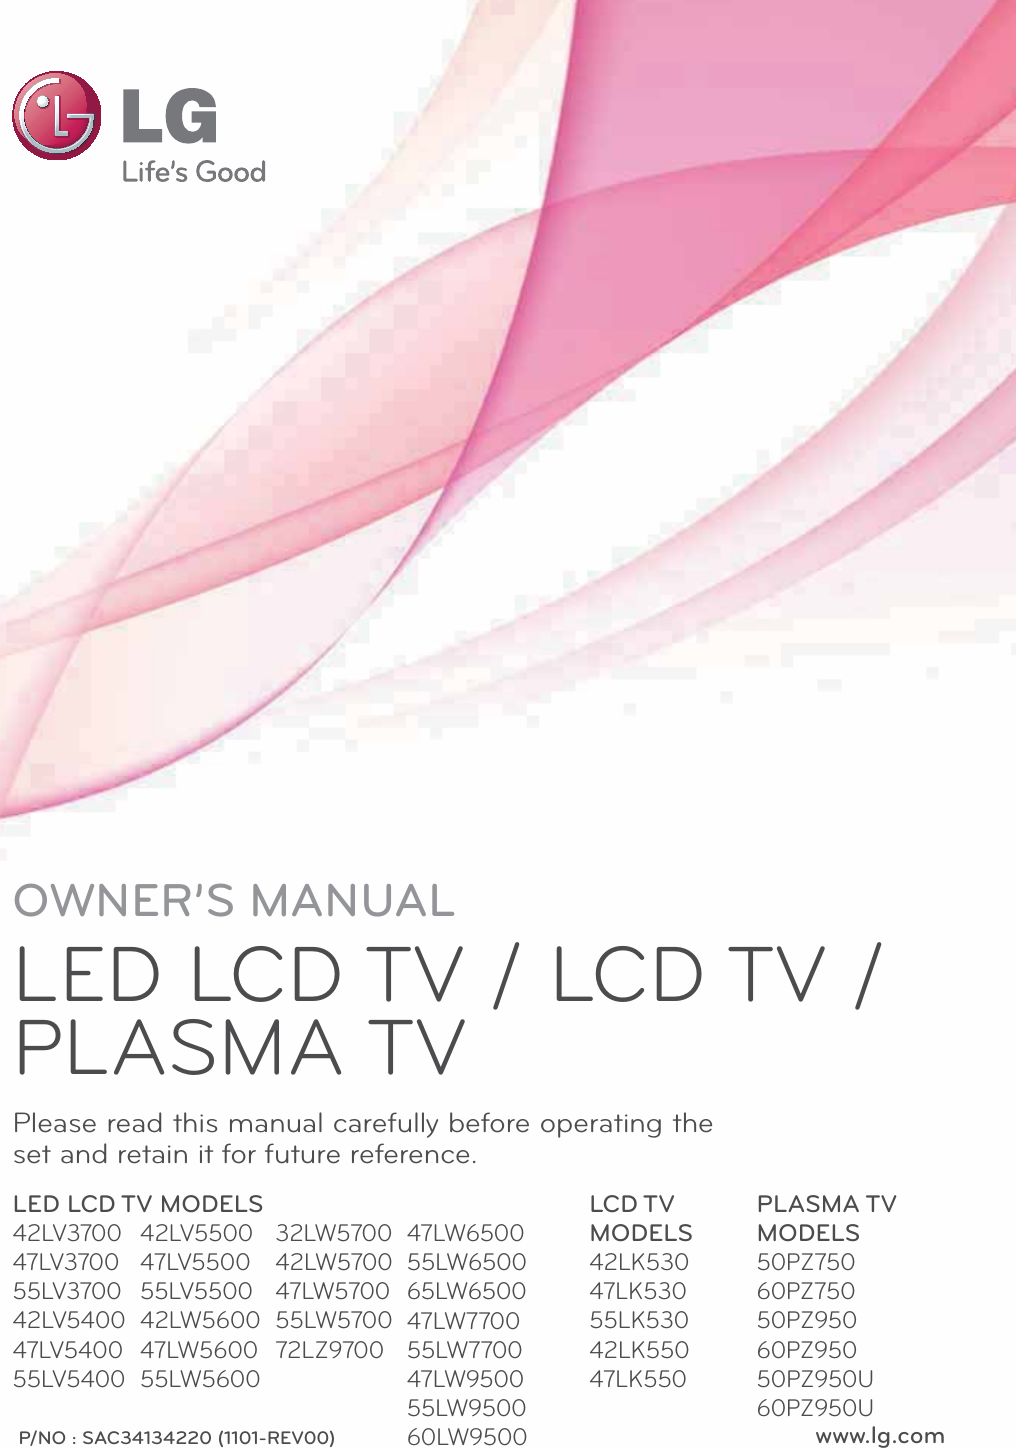 www.lg.comP/NO : SAC34134220 (1101-REV00)OWNER’S MANUALLED LCD TV / LCD TV / PLASMA TVPlease read this manual carefully before operating the set and retain it for future reference.LED LCD TV MODELS42LV370047LV370055LV370042LV540047LV540055LV5400LCD TV MODELS42LK53047LK53055LK53042LK55047LK550PLASMA TV MODELS50PZ75060PZ75050PZ95060PZ95050PZ950U60PZ950U42LV550047LV550055LV550042LW560047LW560055LW560032LW570042LW570047LW570055LW570072LZ970047LW650055LW650065LW650047LW770055LW770047LW950055LW950060LW9500